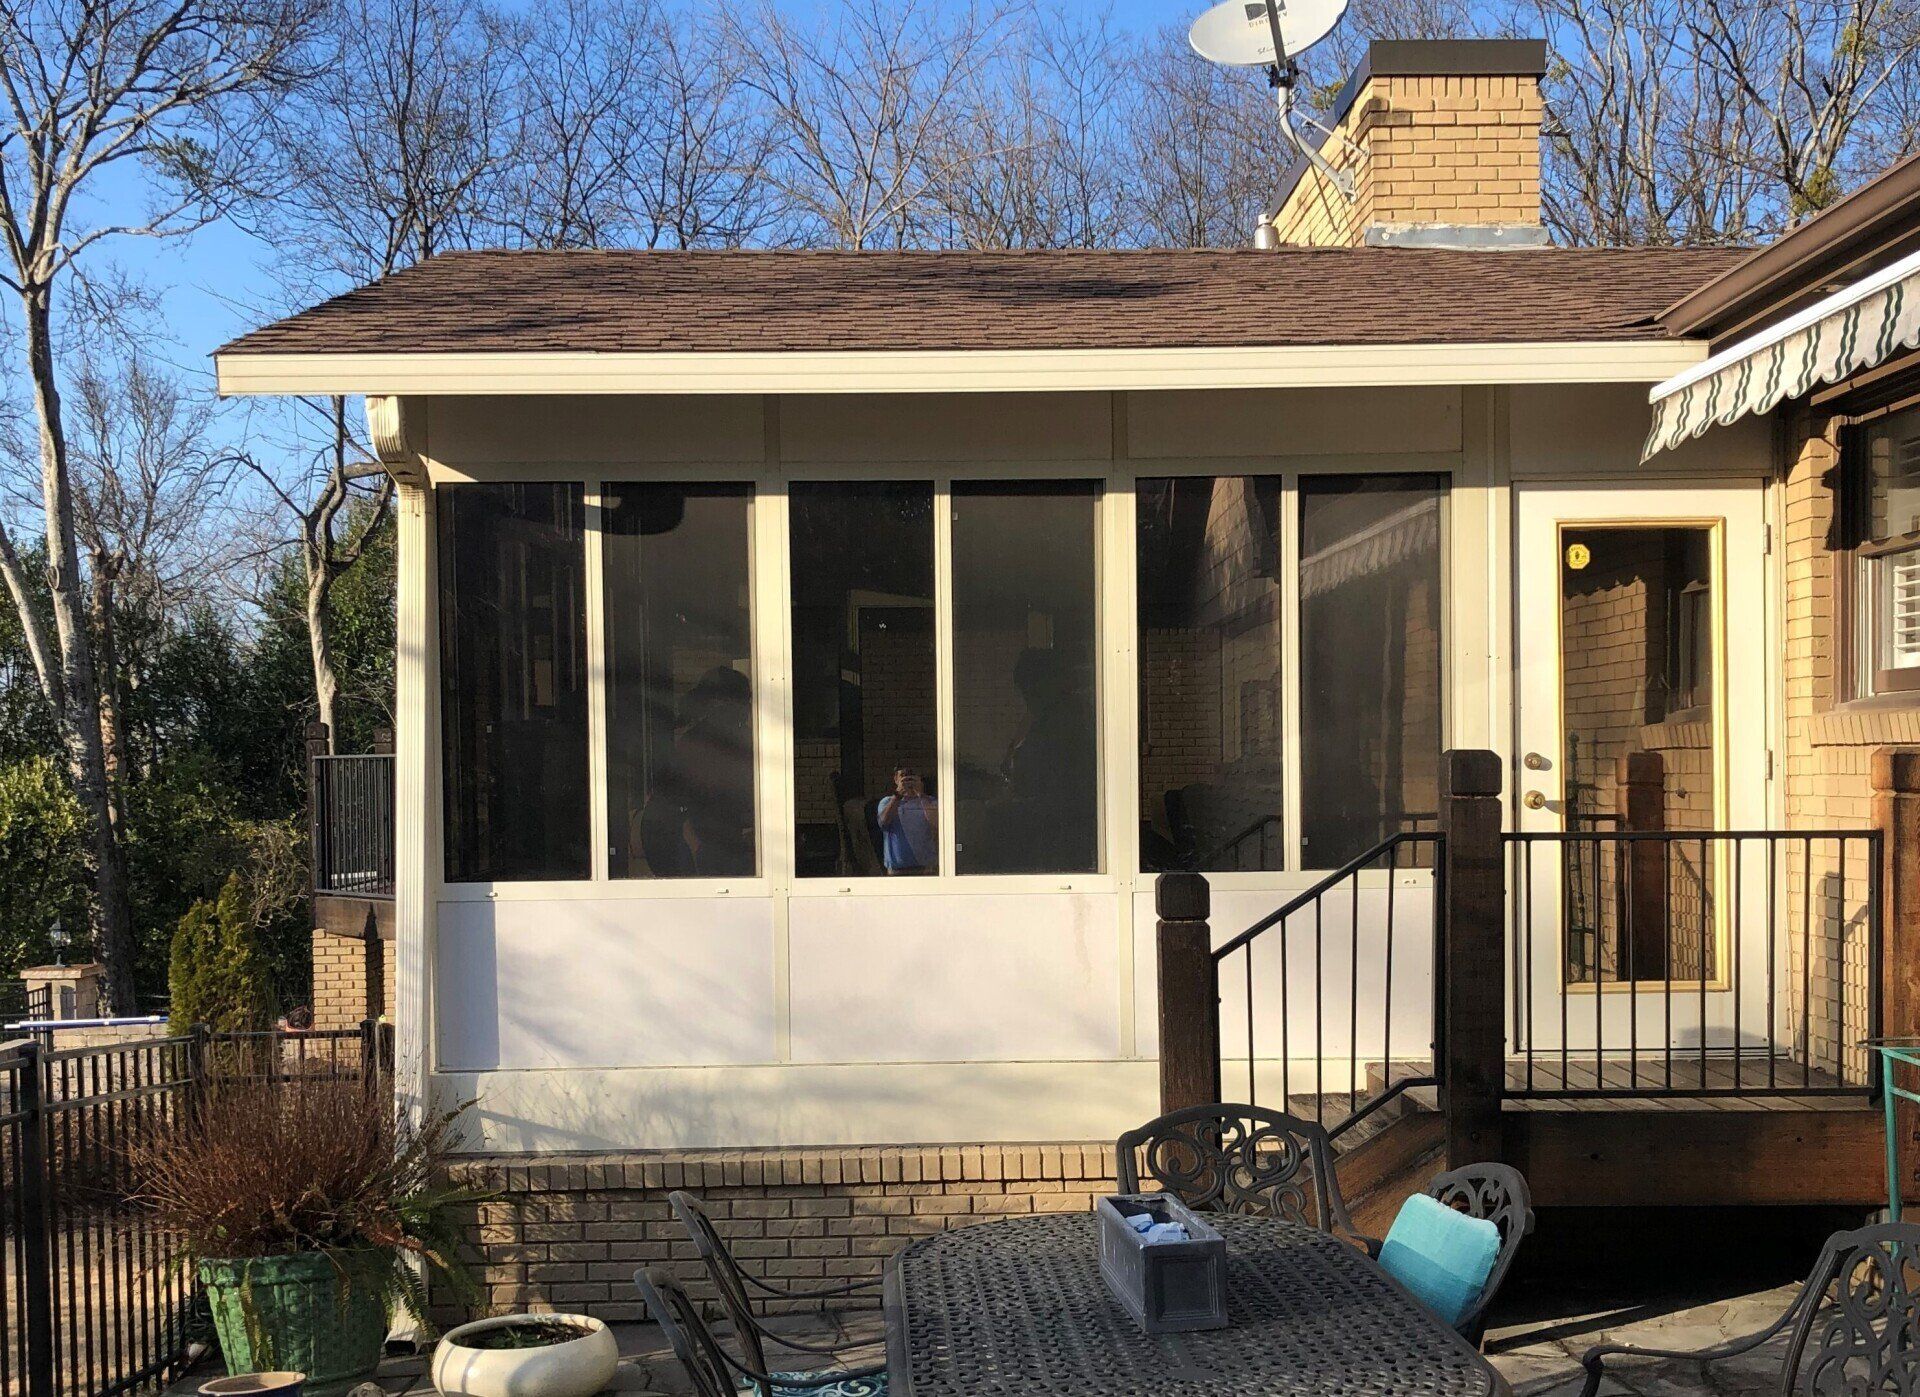 home window tinting service in Birmingham, AL - Now the perfect environment has been created with SPF Residential tint. Blocking 85% heat from entering this Sunroom in Birmingham, AL